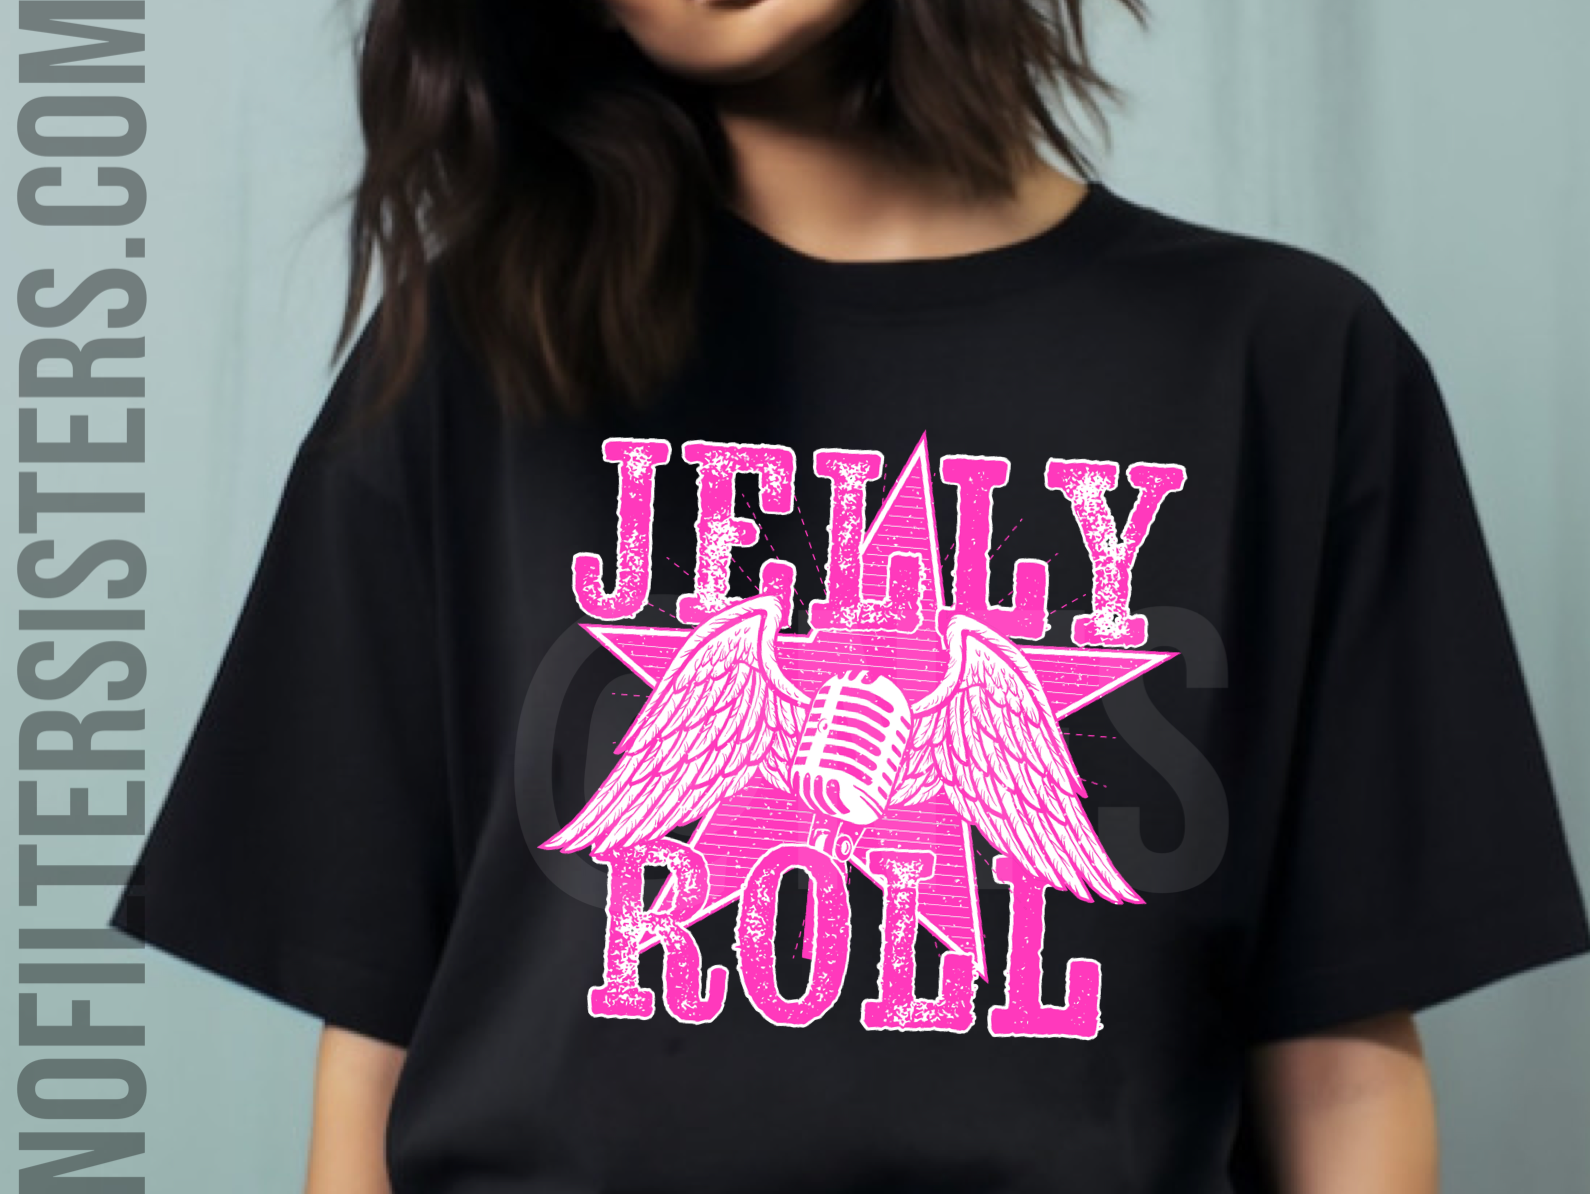 Dress up in the Jelly Roll R&R Wings Pink T-shirt and display your fashion